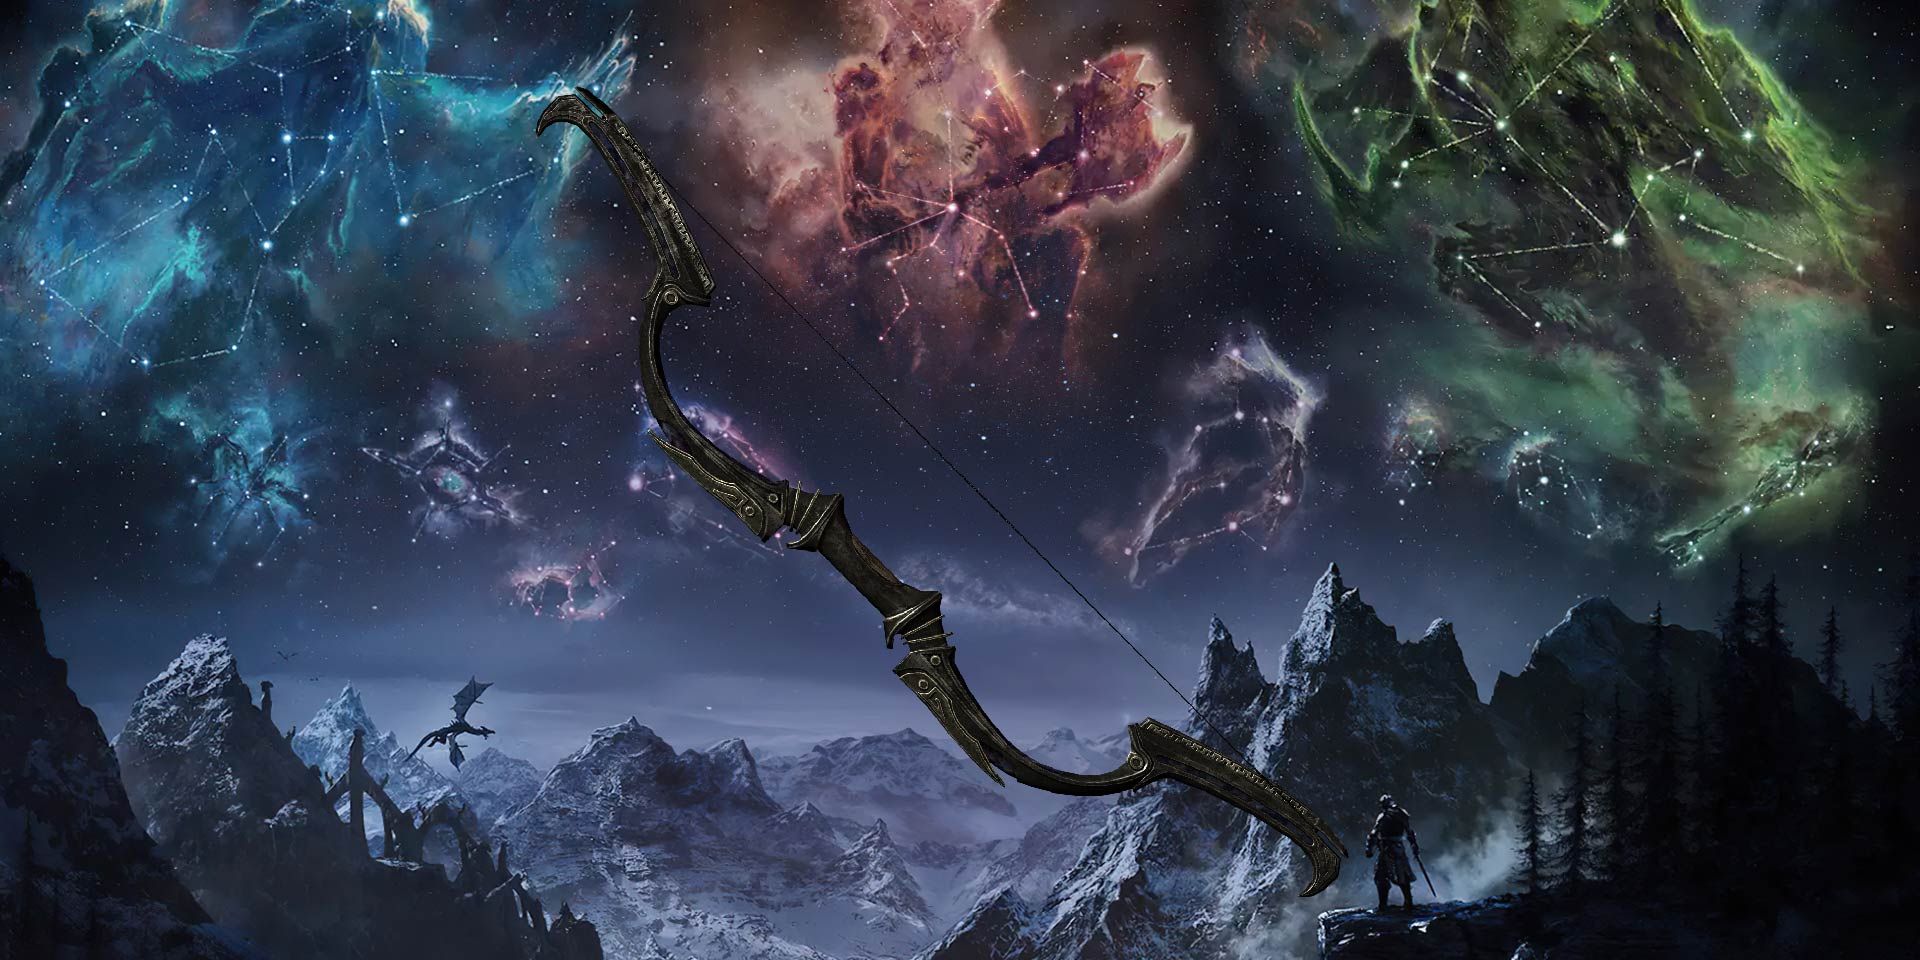 The Dwarven Black Bow of Fate among mountains and Elder Scrolls star signs.